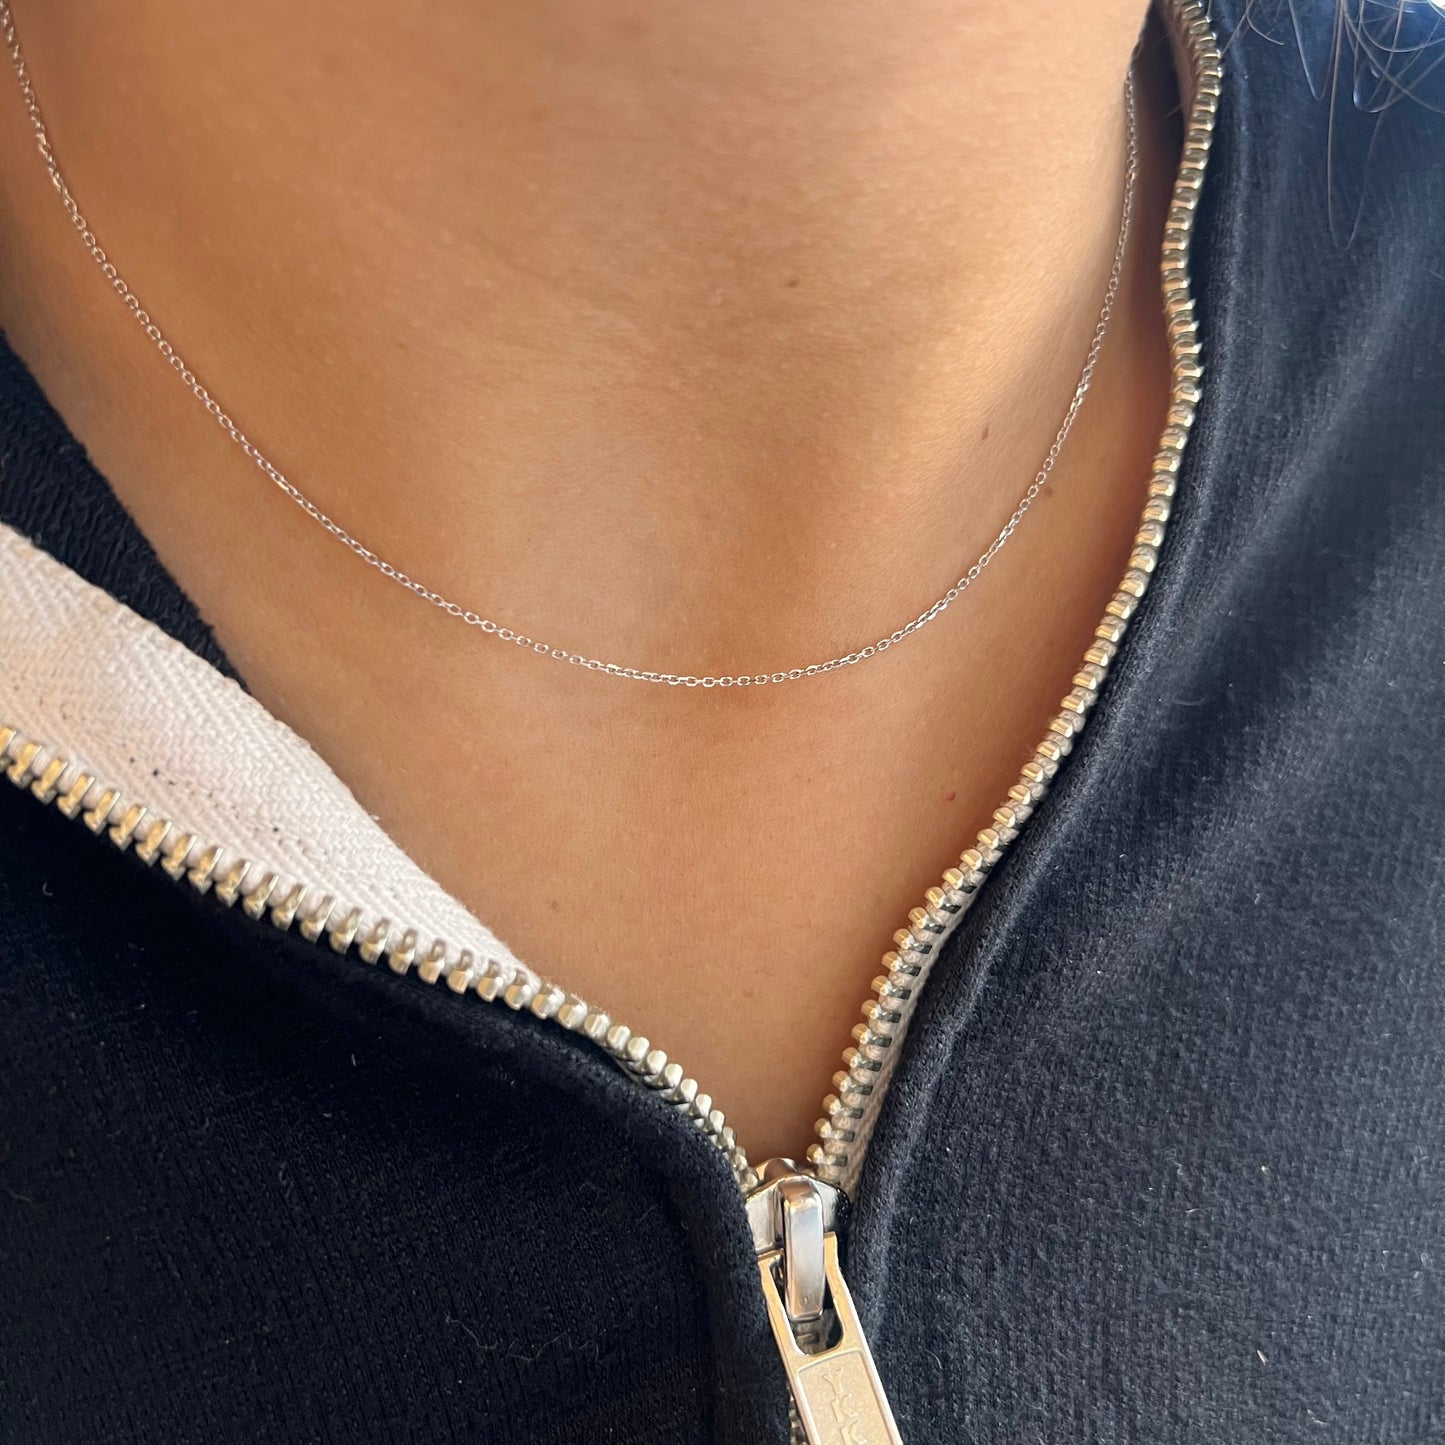 Classic Gold Cable Chain Necklace, 1.2 Grams